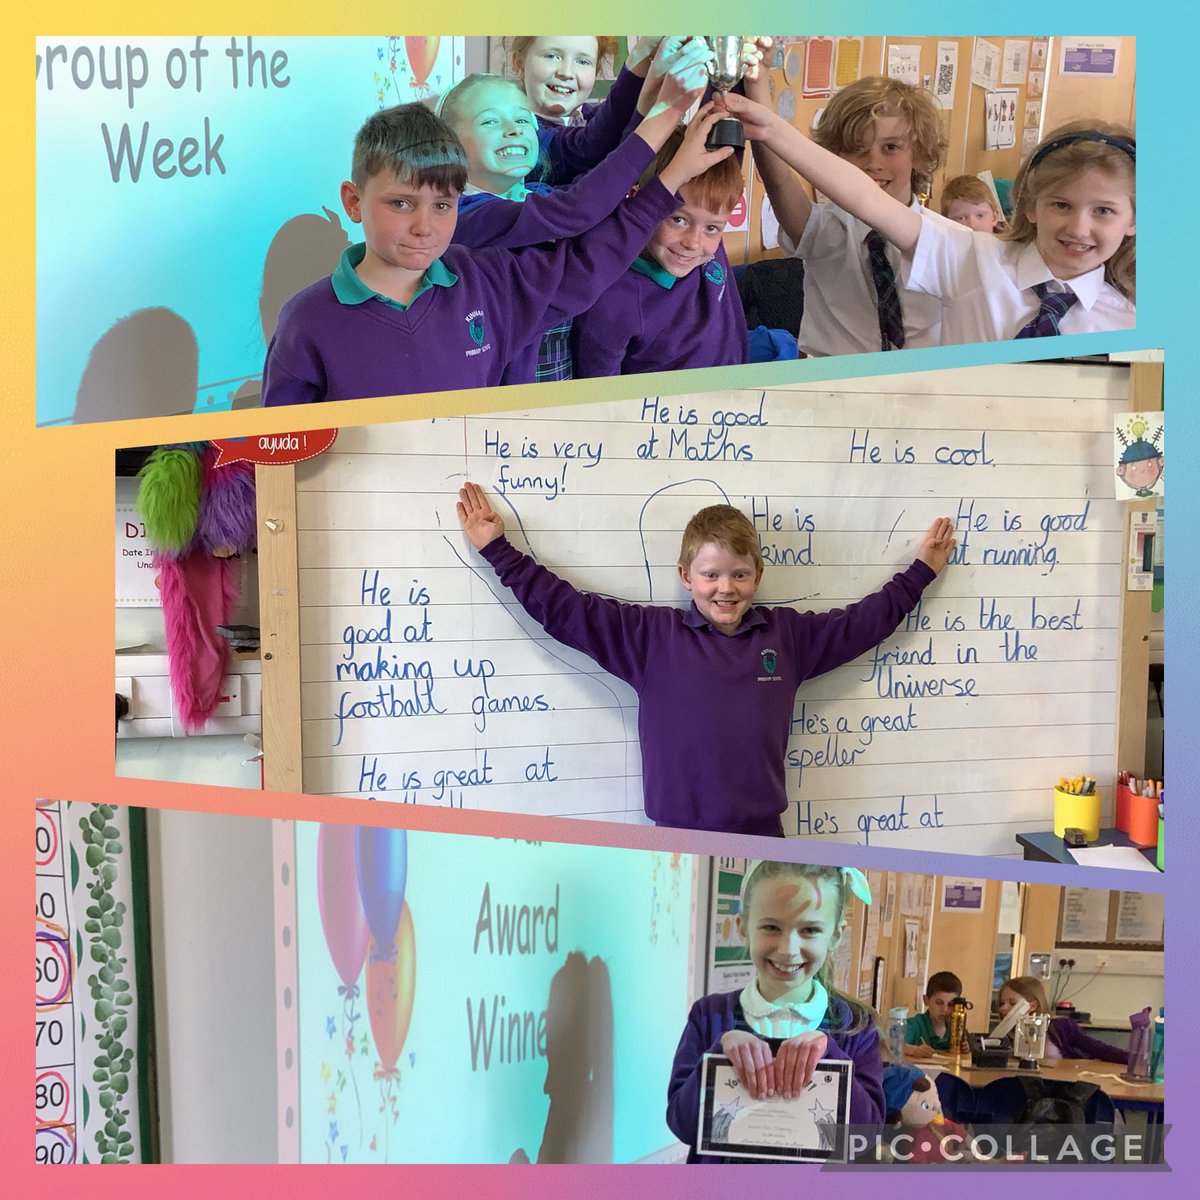 Well done to P4R for working so hard, preparing for Assembly! Well done to this week’s Star Pupil, Team of the Week and Pupil of the Week! 👏🏻🌟😀